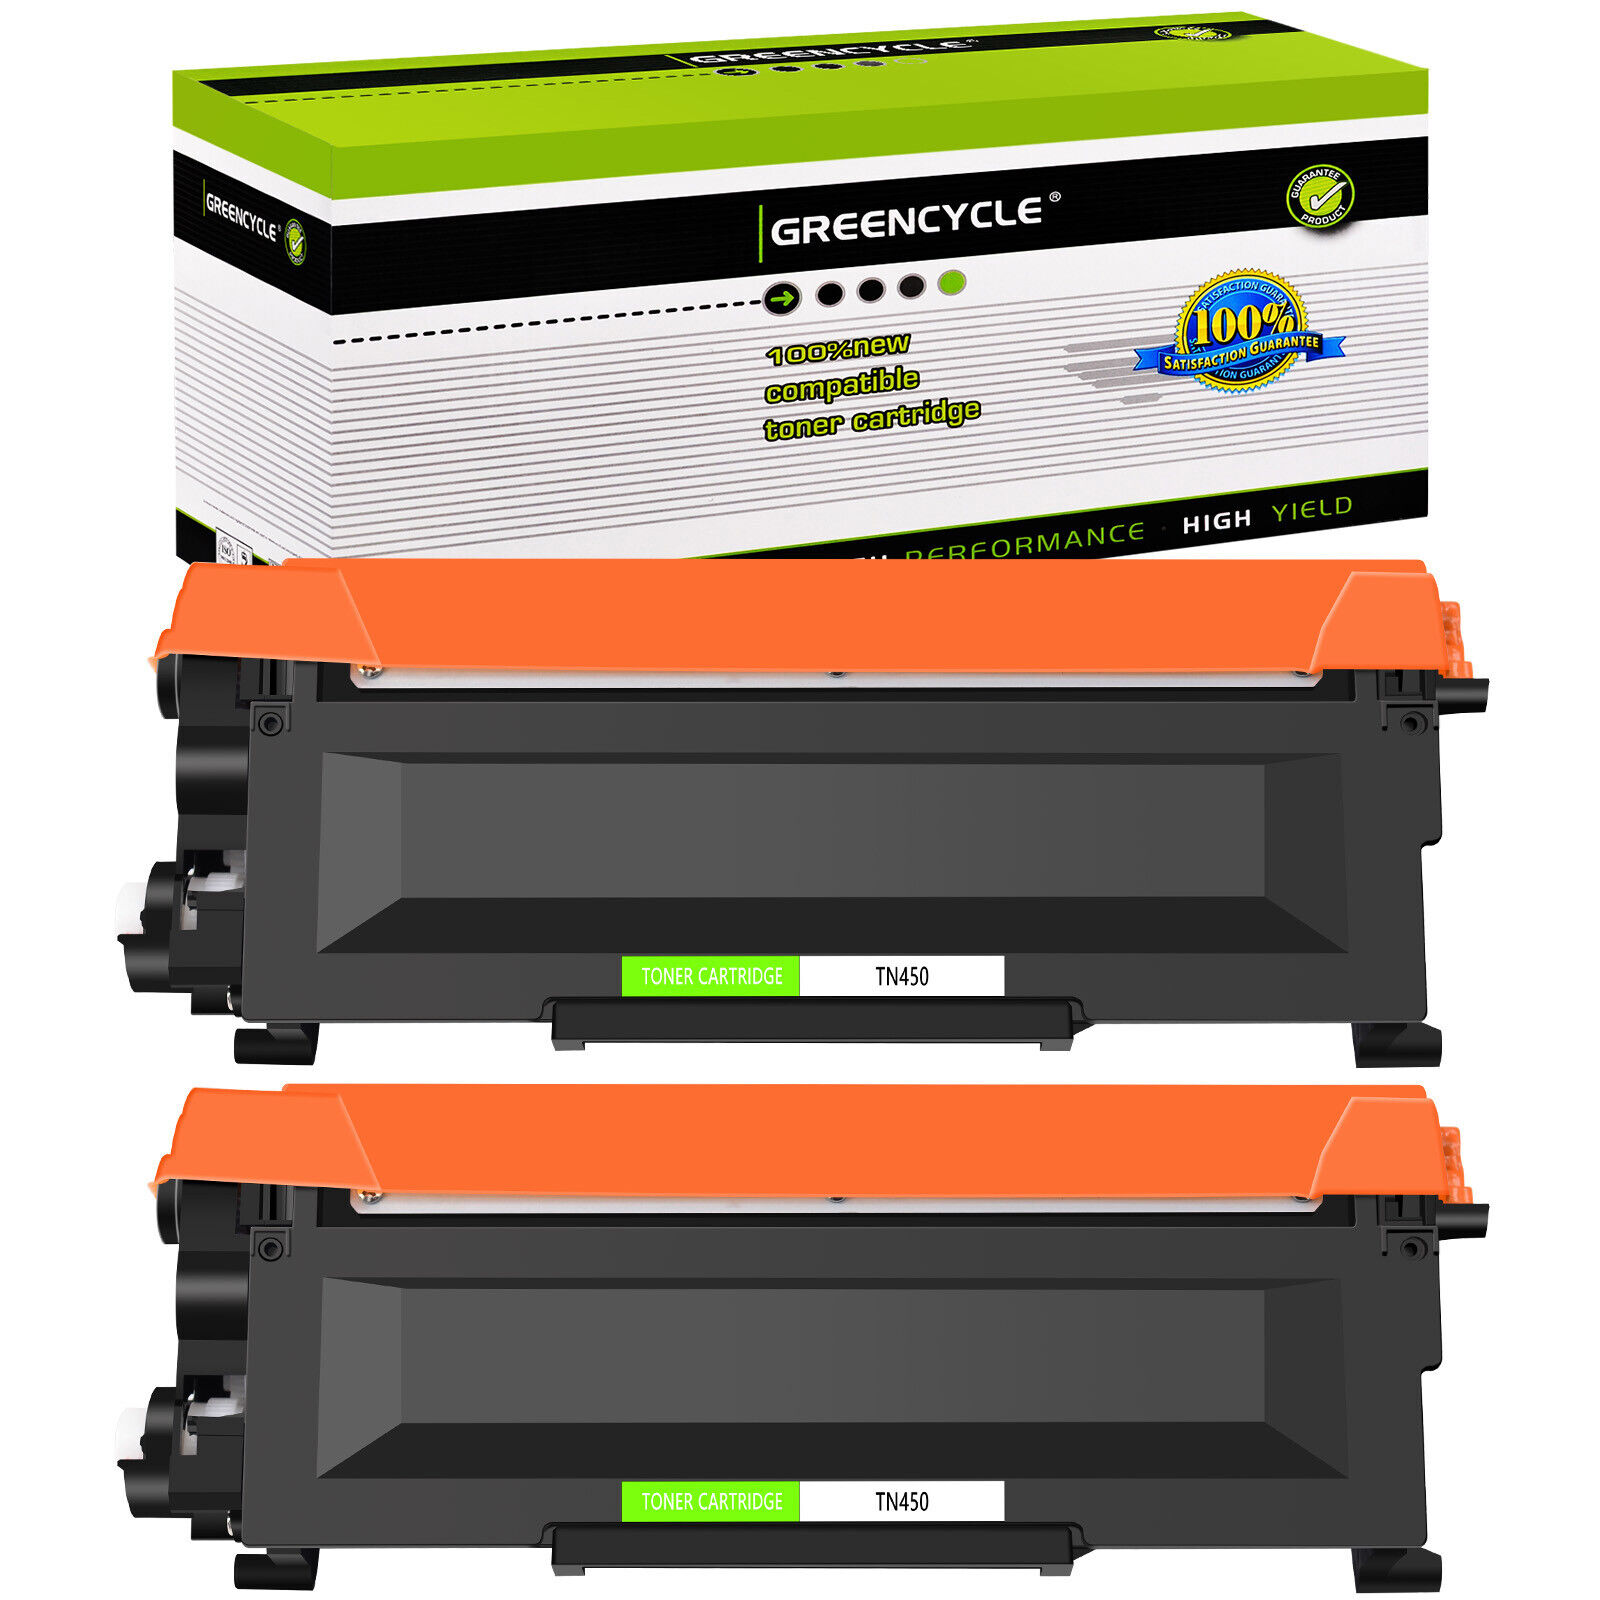 GREENCYCLE 2PK TN450 Toner Cartridge Fit For Brother HL-2130 2240D 2270DW 2280DW